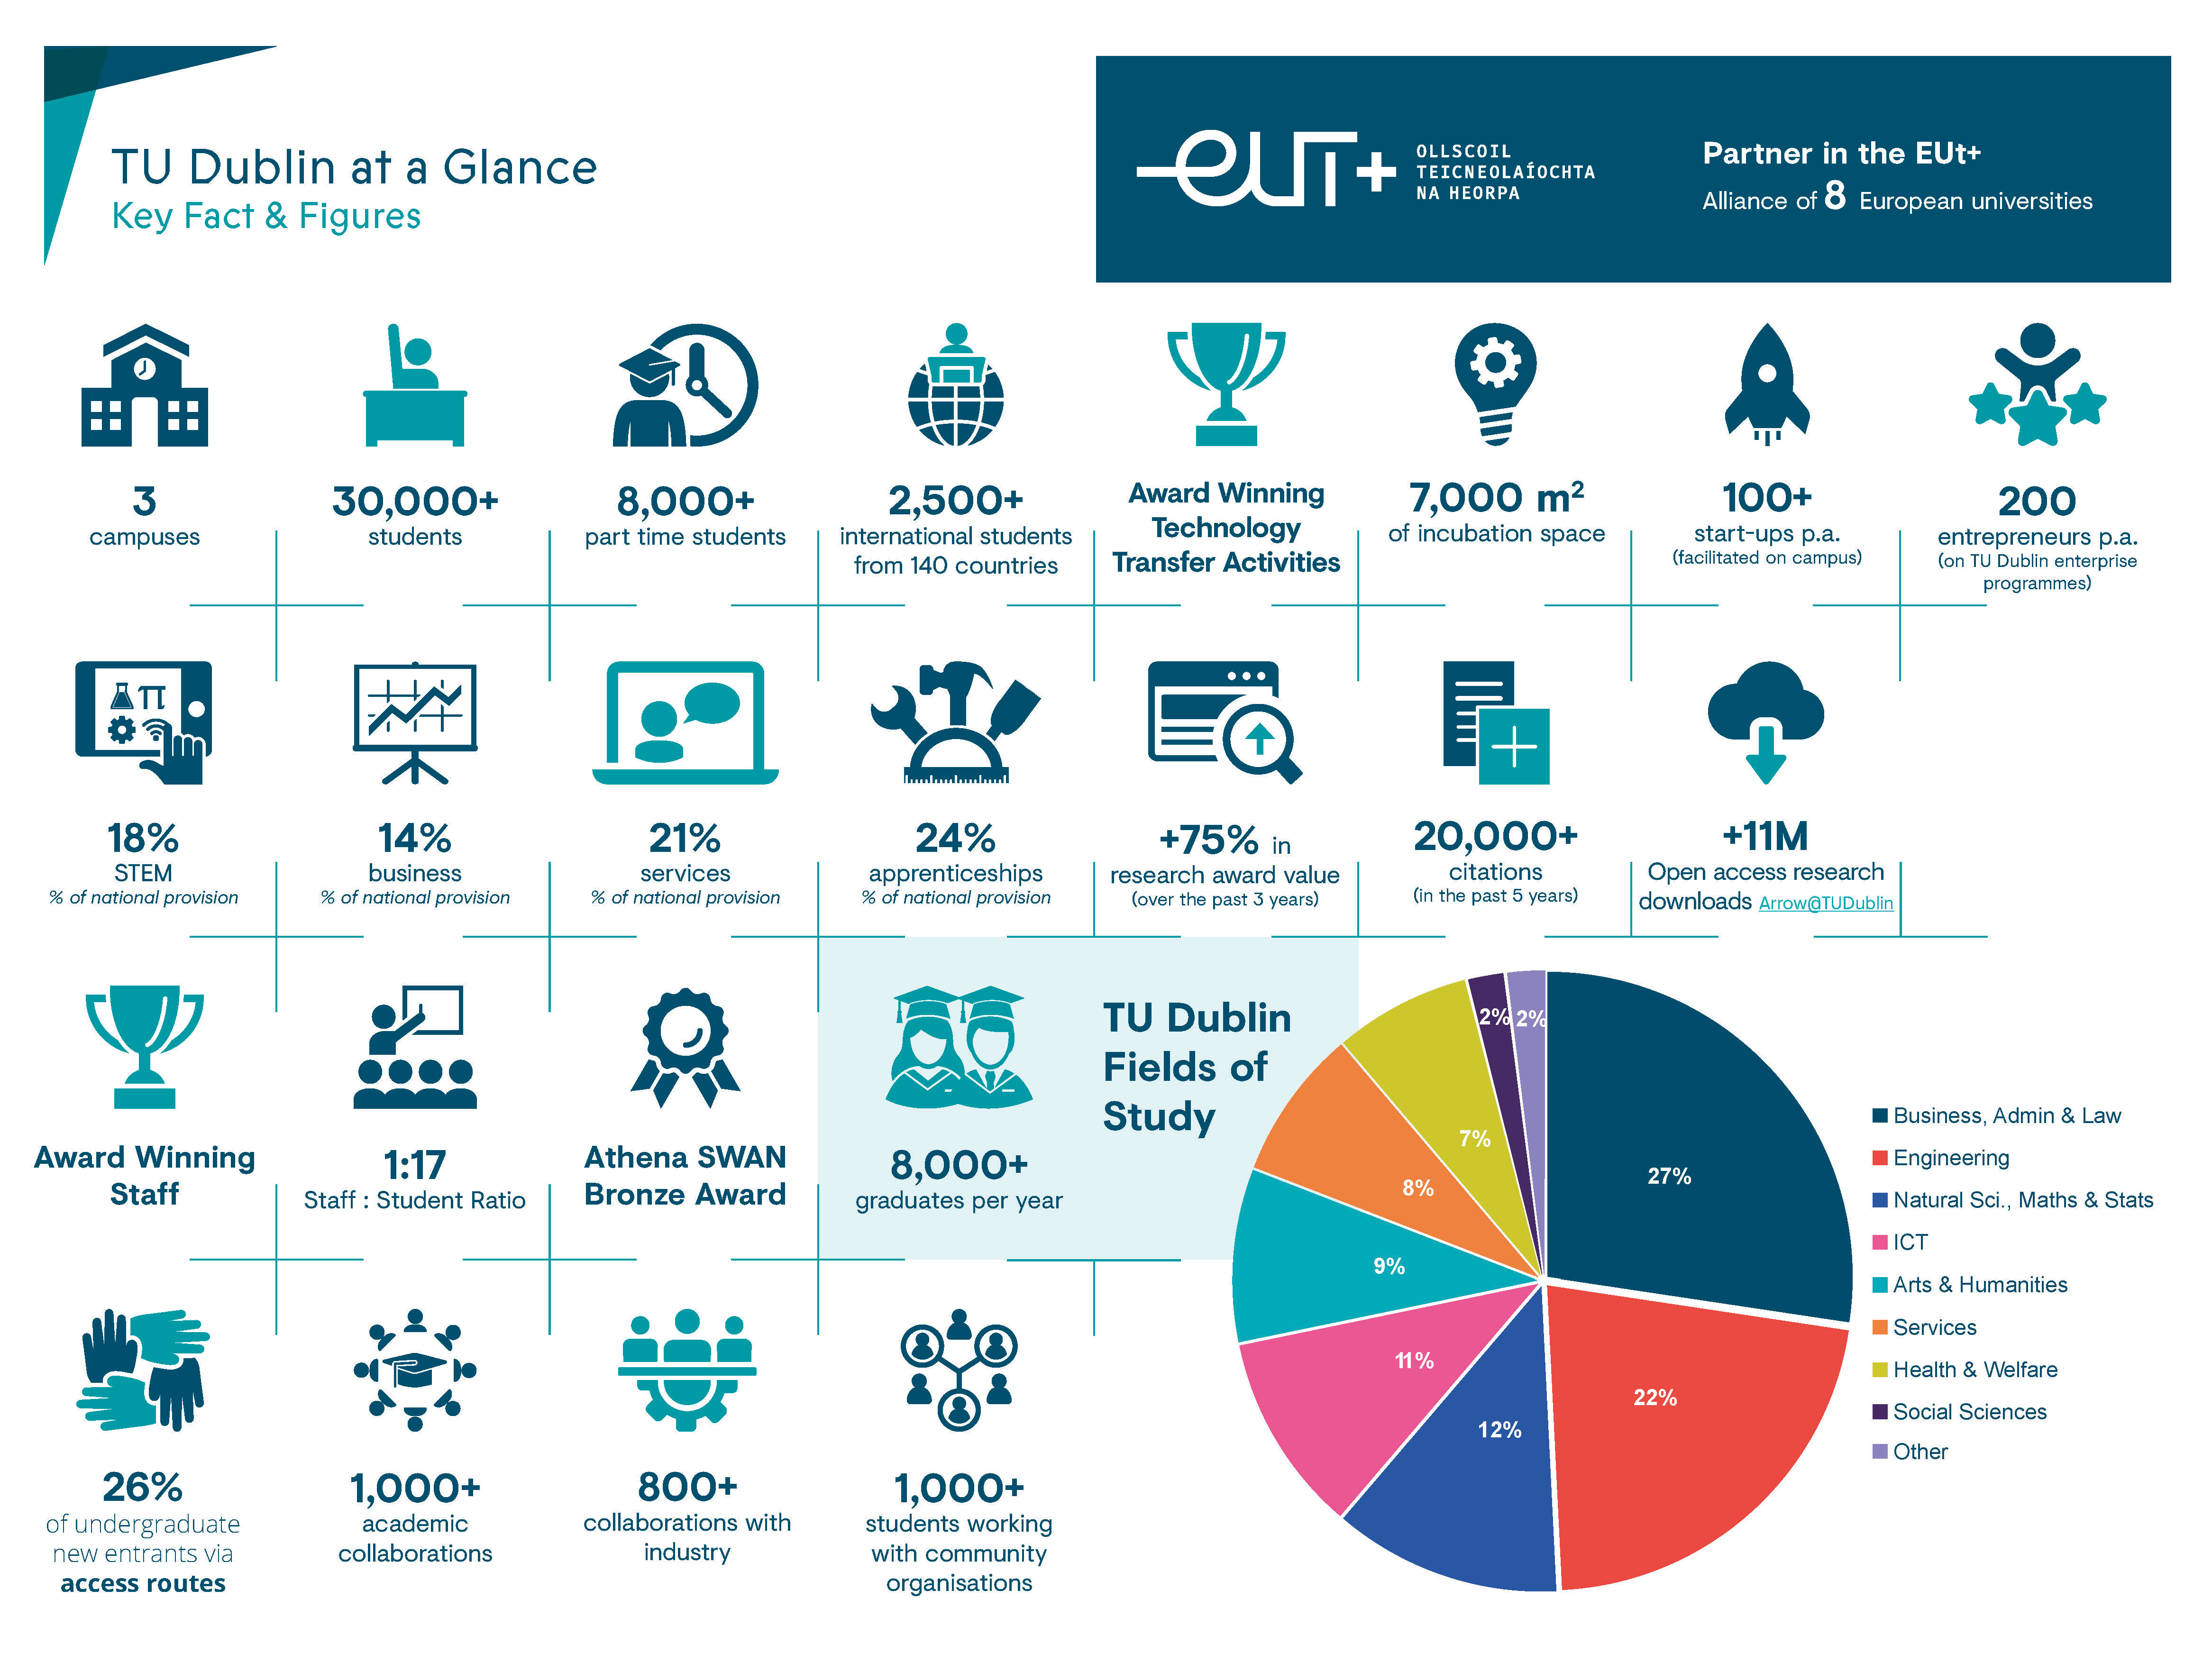 TU Dublin at a glance facts and figures